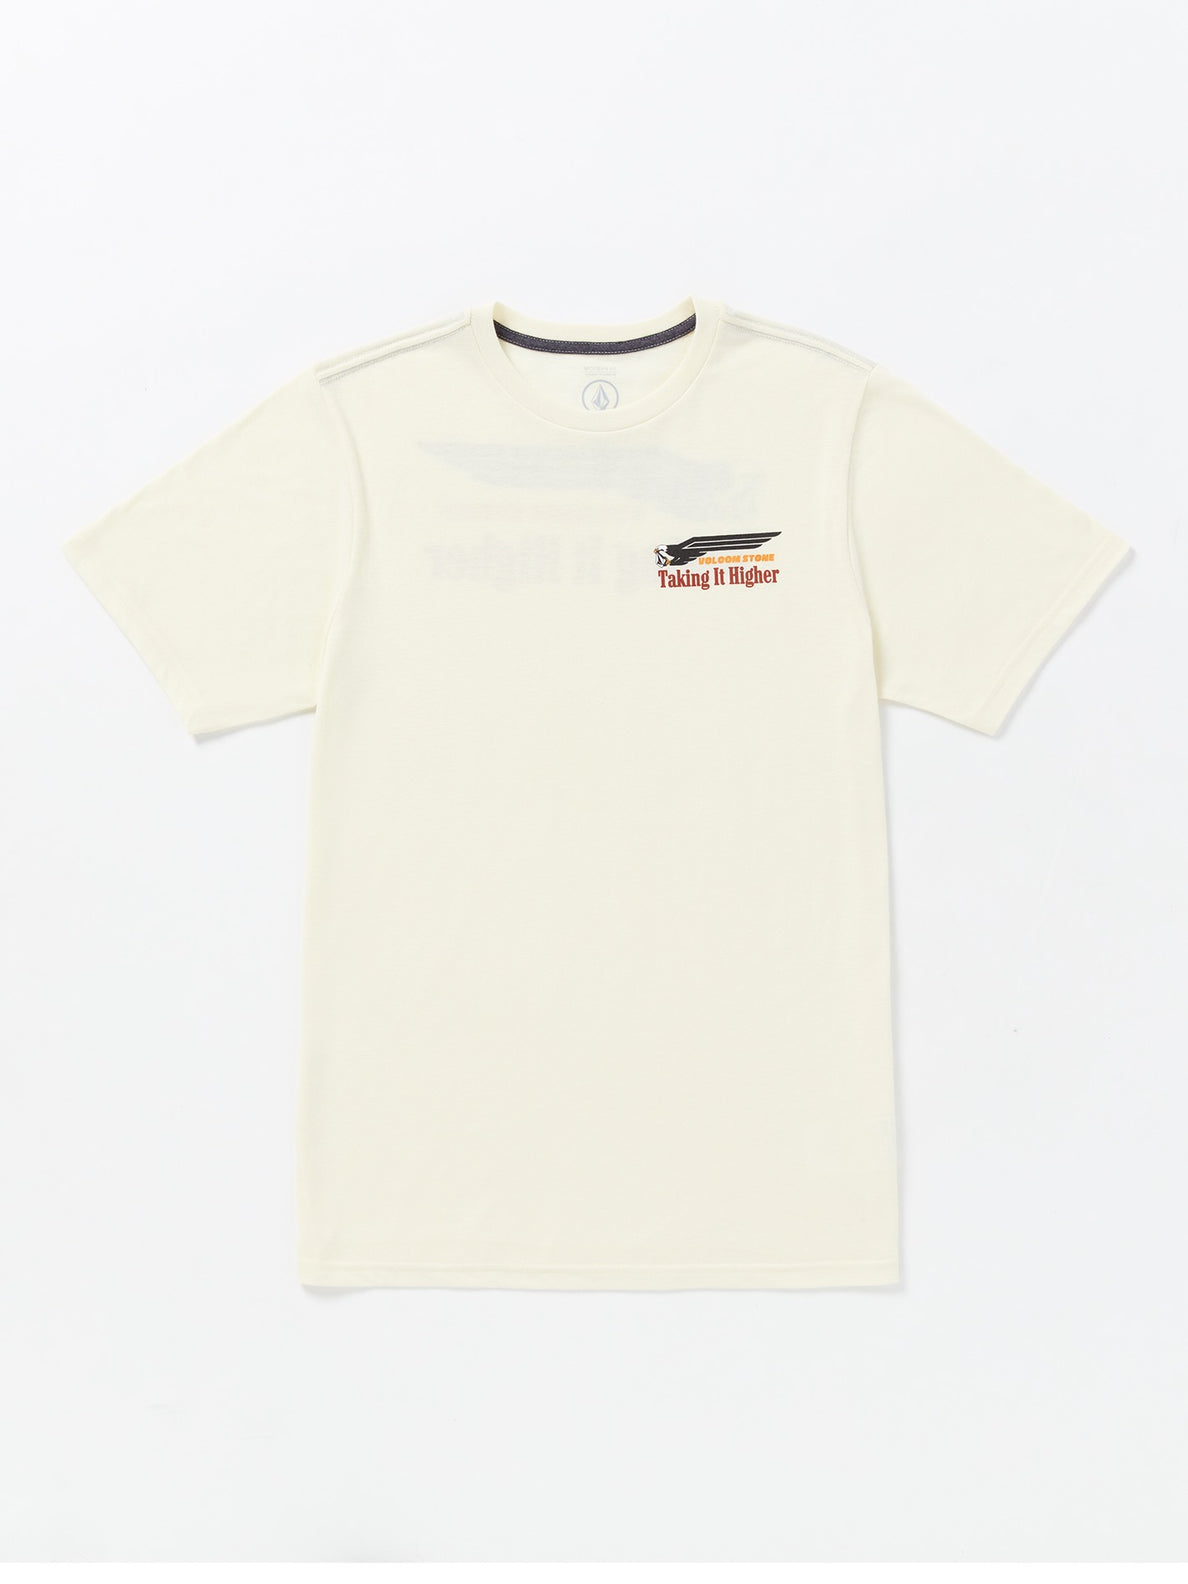 Take It Higher Short Sleeve Tee - Off White Heather